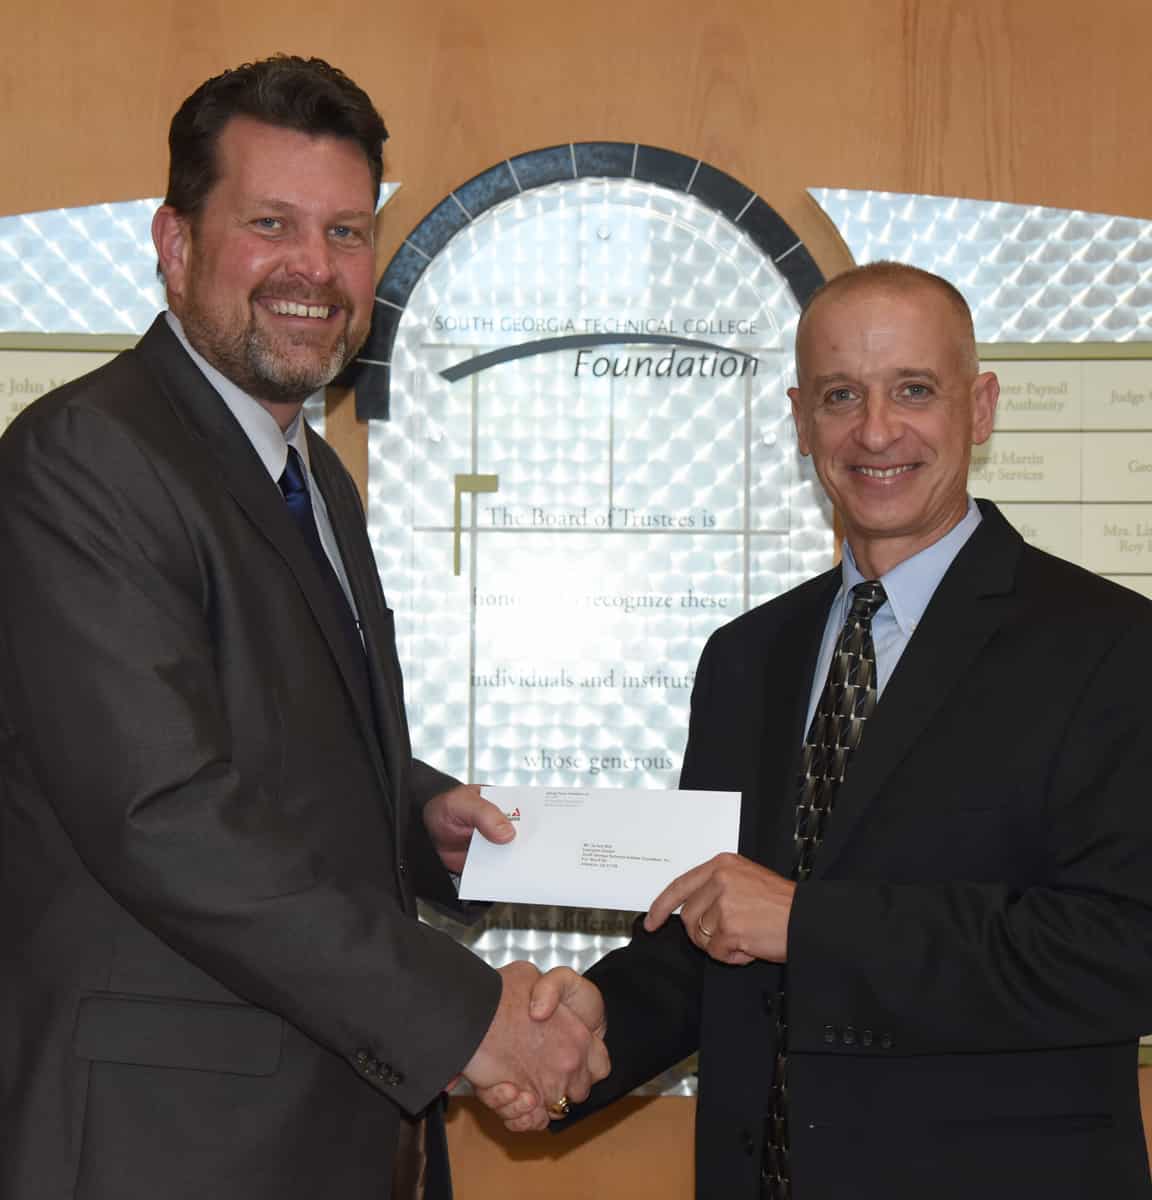 South Georgia Technical College President Dr. John Watford is shown above (l) thanking Georgia Power Area Manager Jem Morris (r) for the donation to the SGTC Foundation.